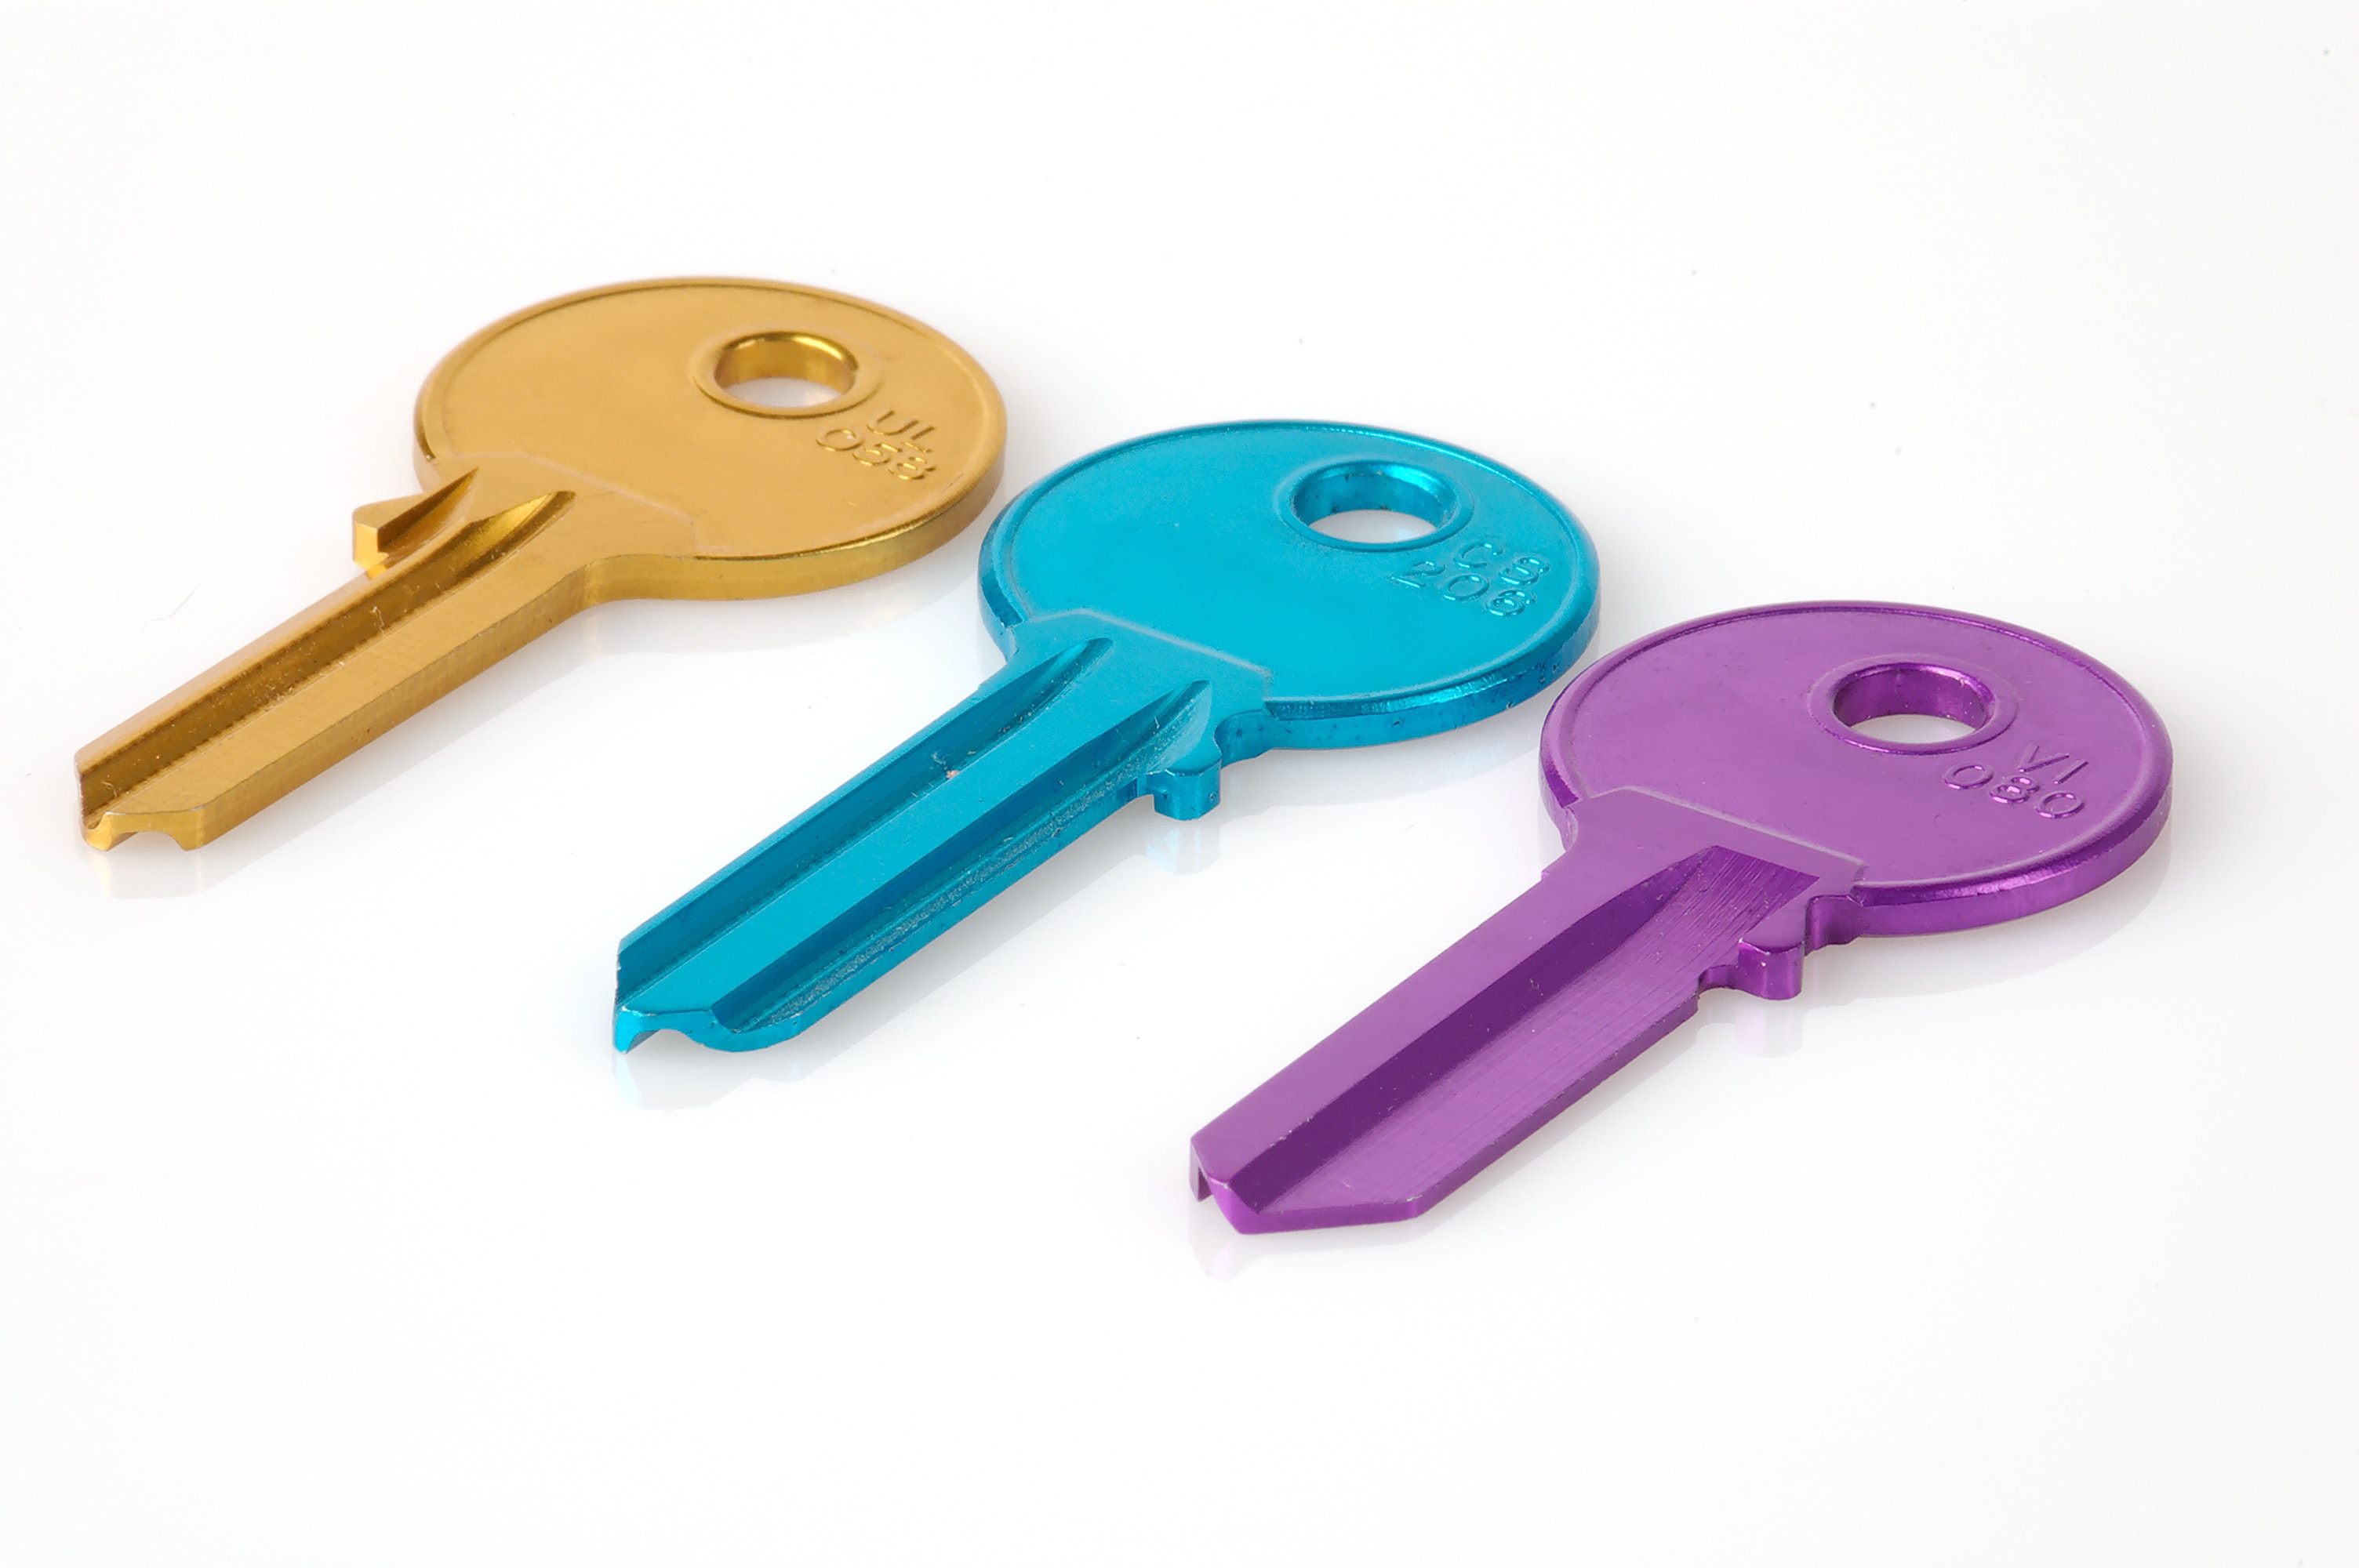 Three keys, yellow, blue and purple, on a white surface.